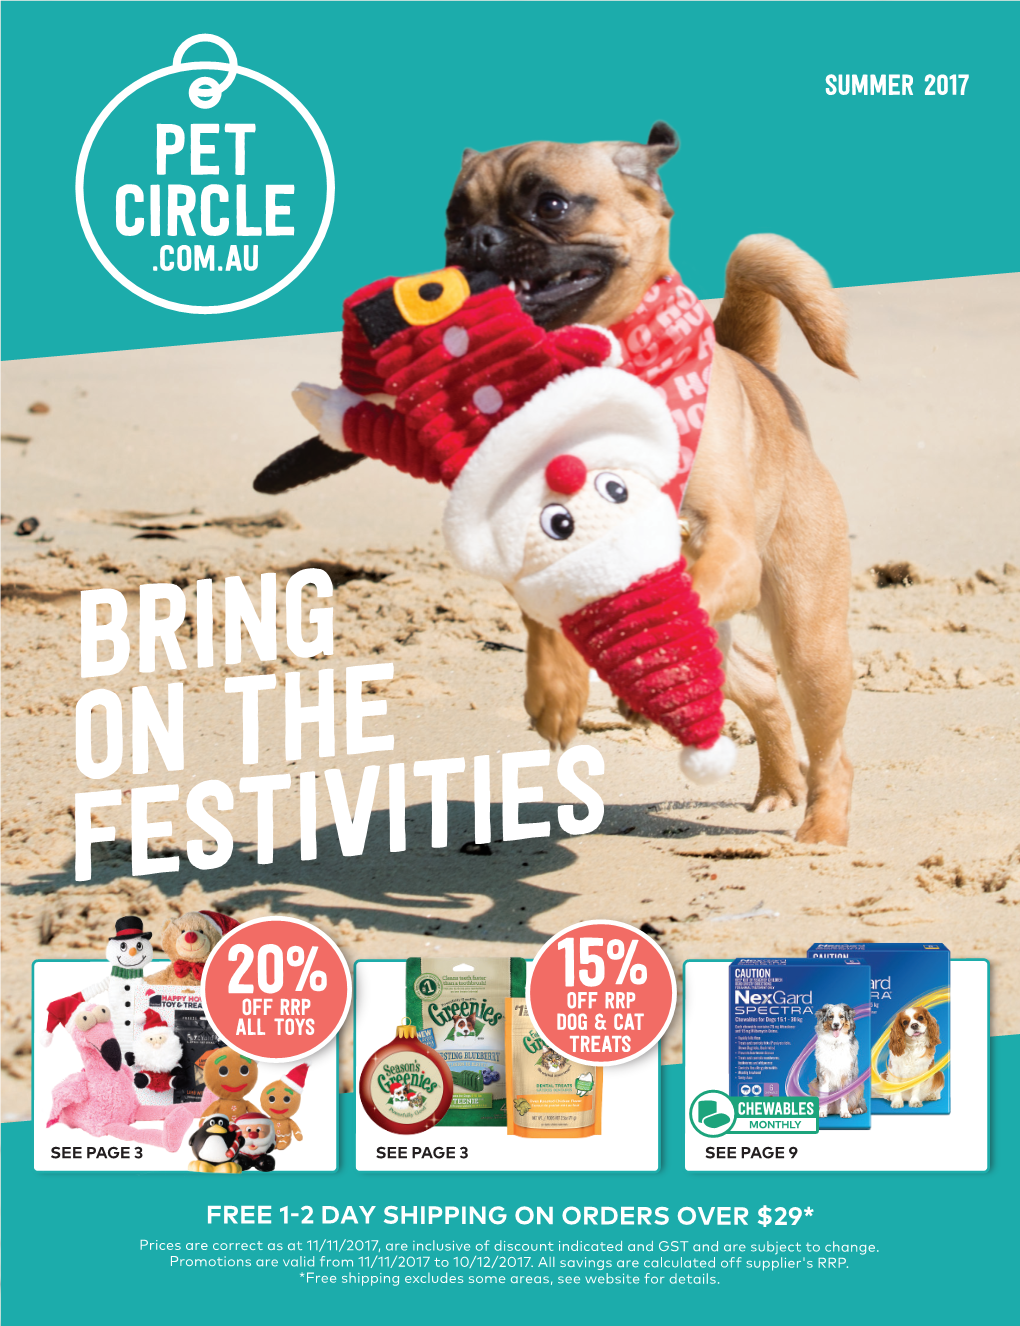 20% 15% Off Rrp Off Rrp All Toys Dog & Cat Treats